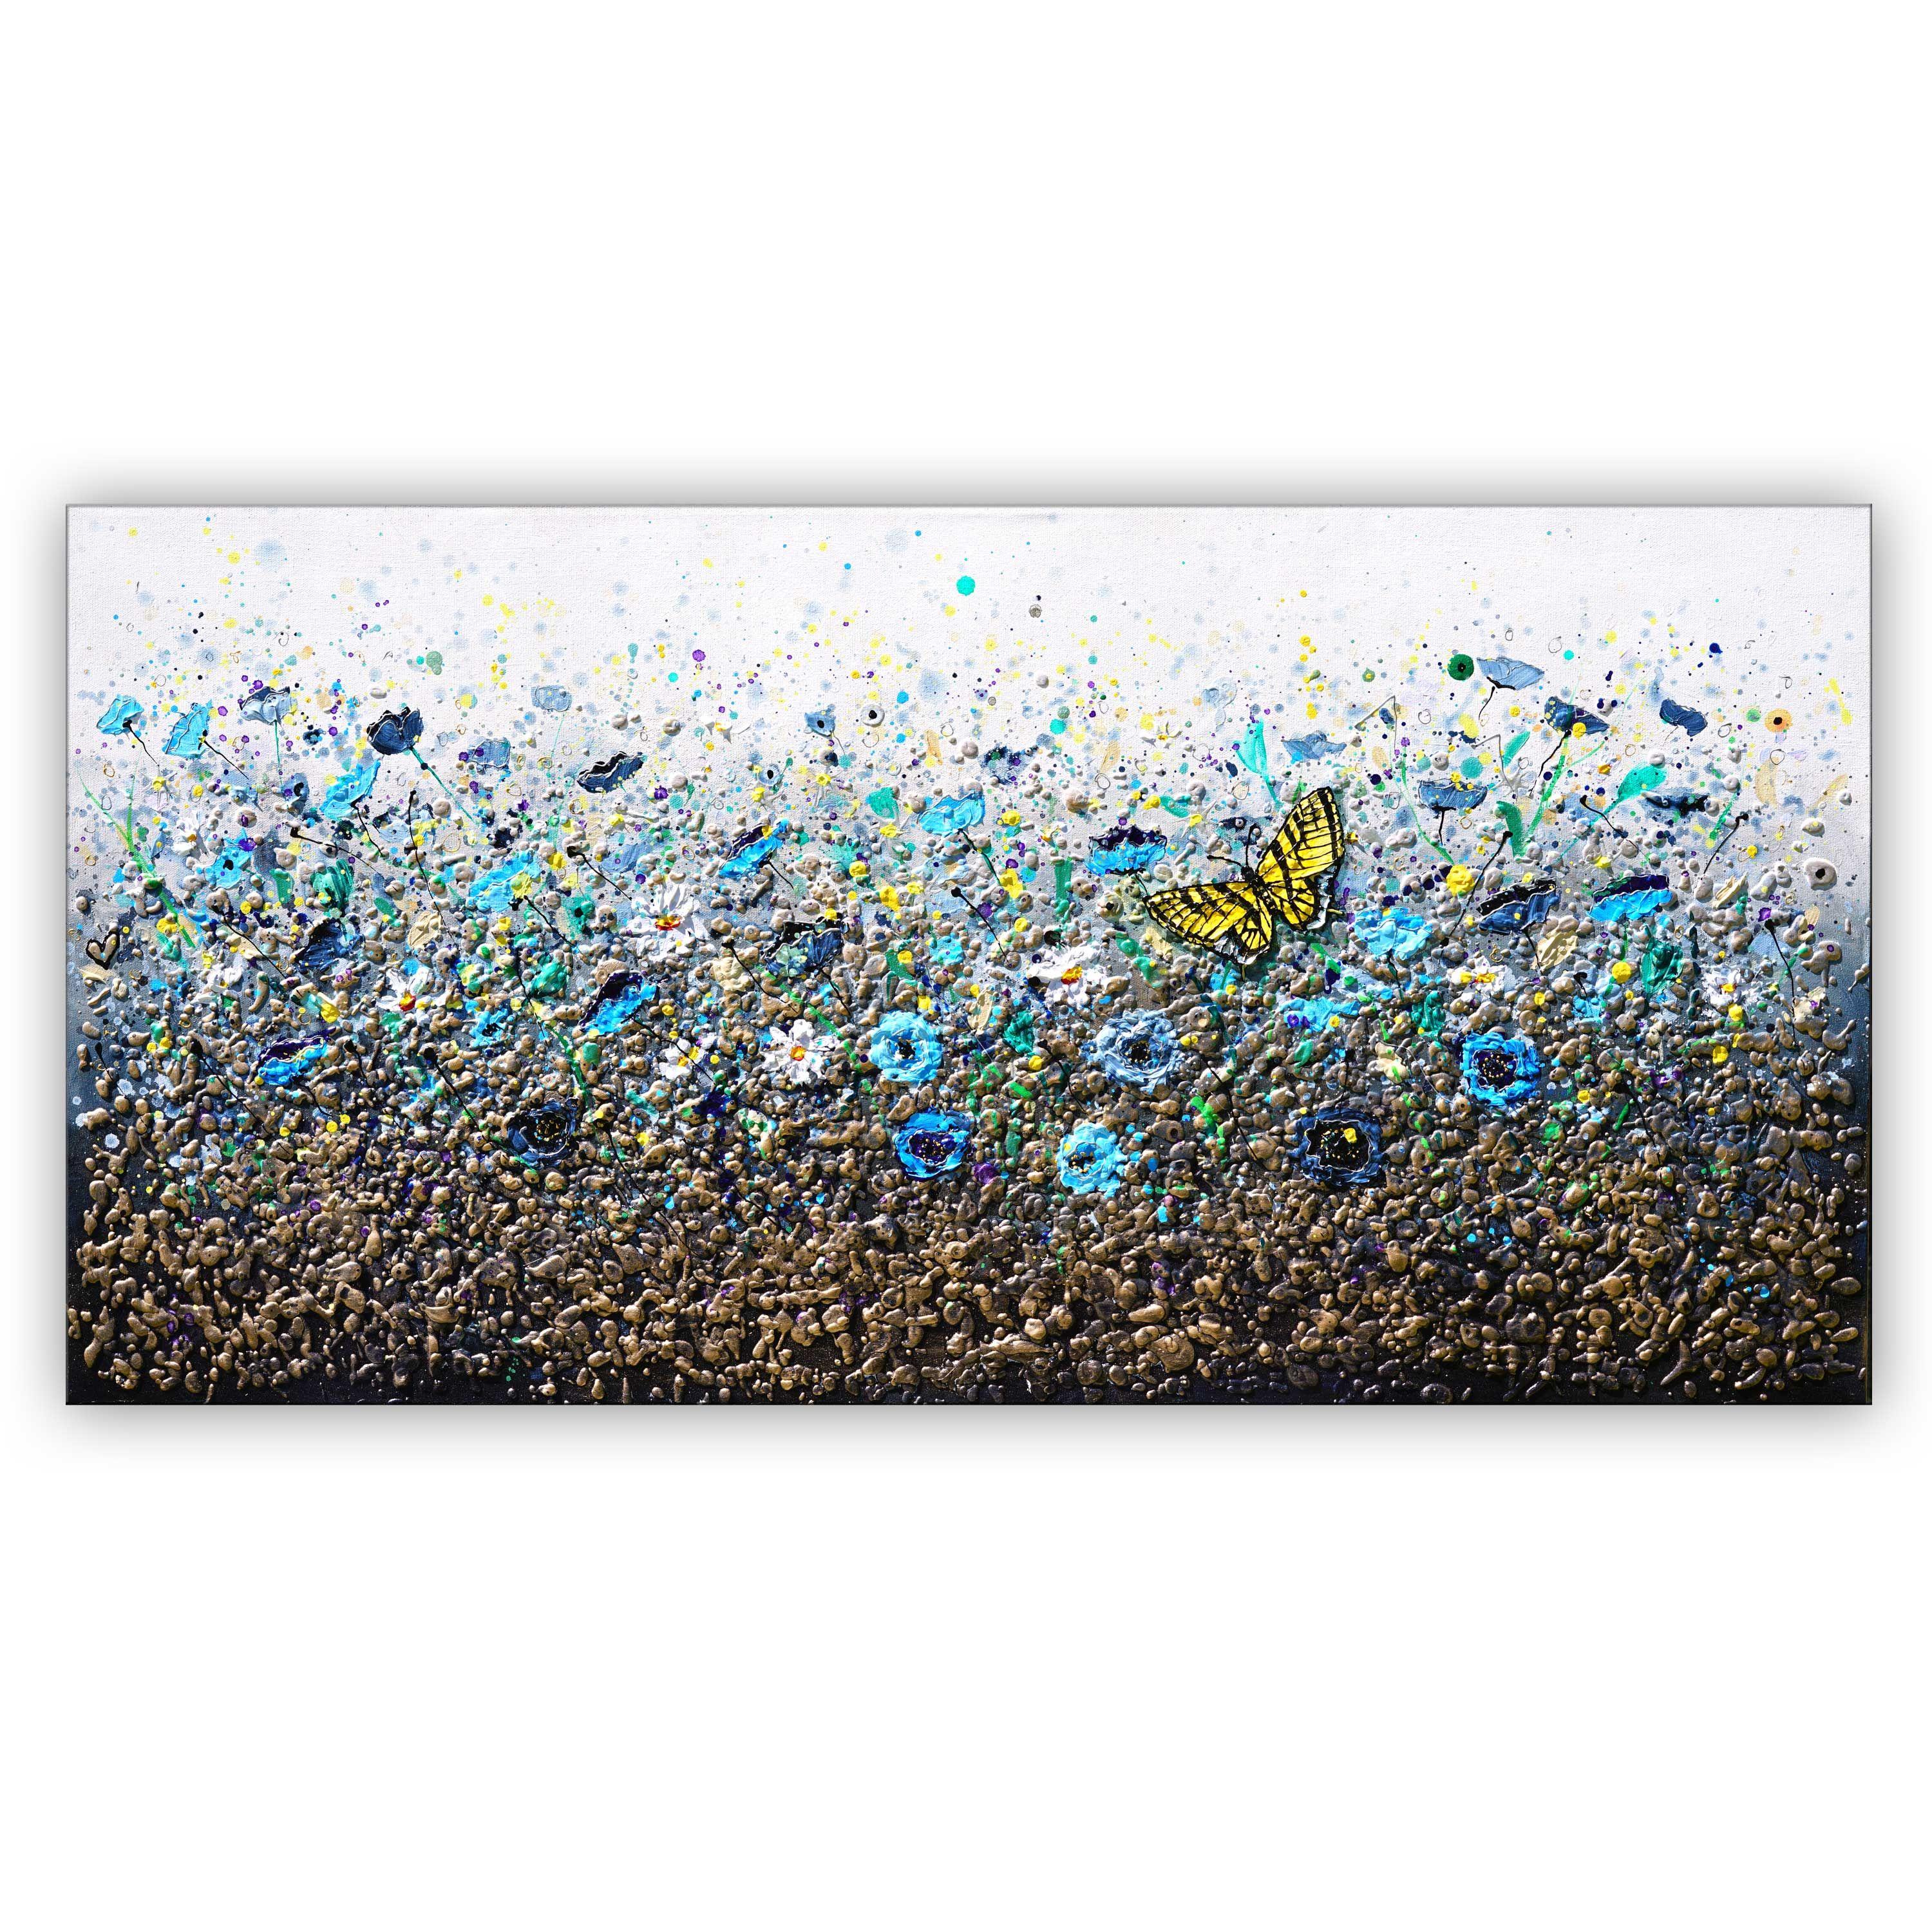 Painting: Acrylic on Canvas.    Original painting of Blue abstract floral painting with a Swallowtail Butterfly.    A textured canvas painting, painted with thick paint using a palette knife, brushes, fingers and sponges    TITLE: Swallowtail